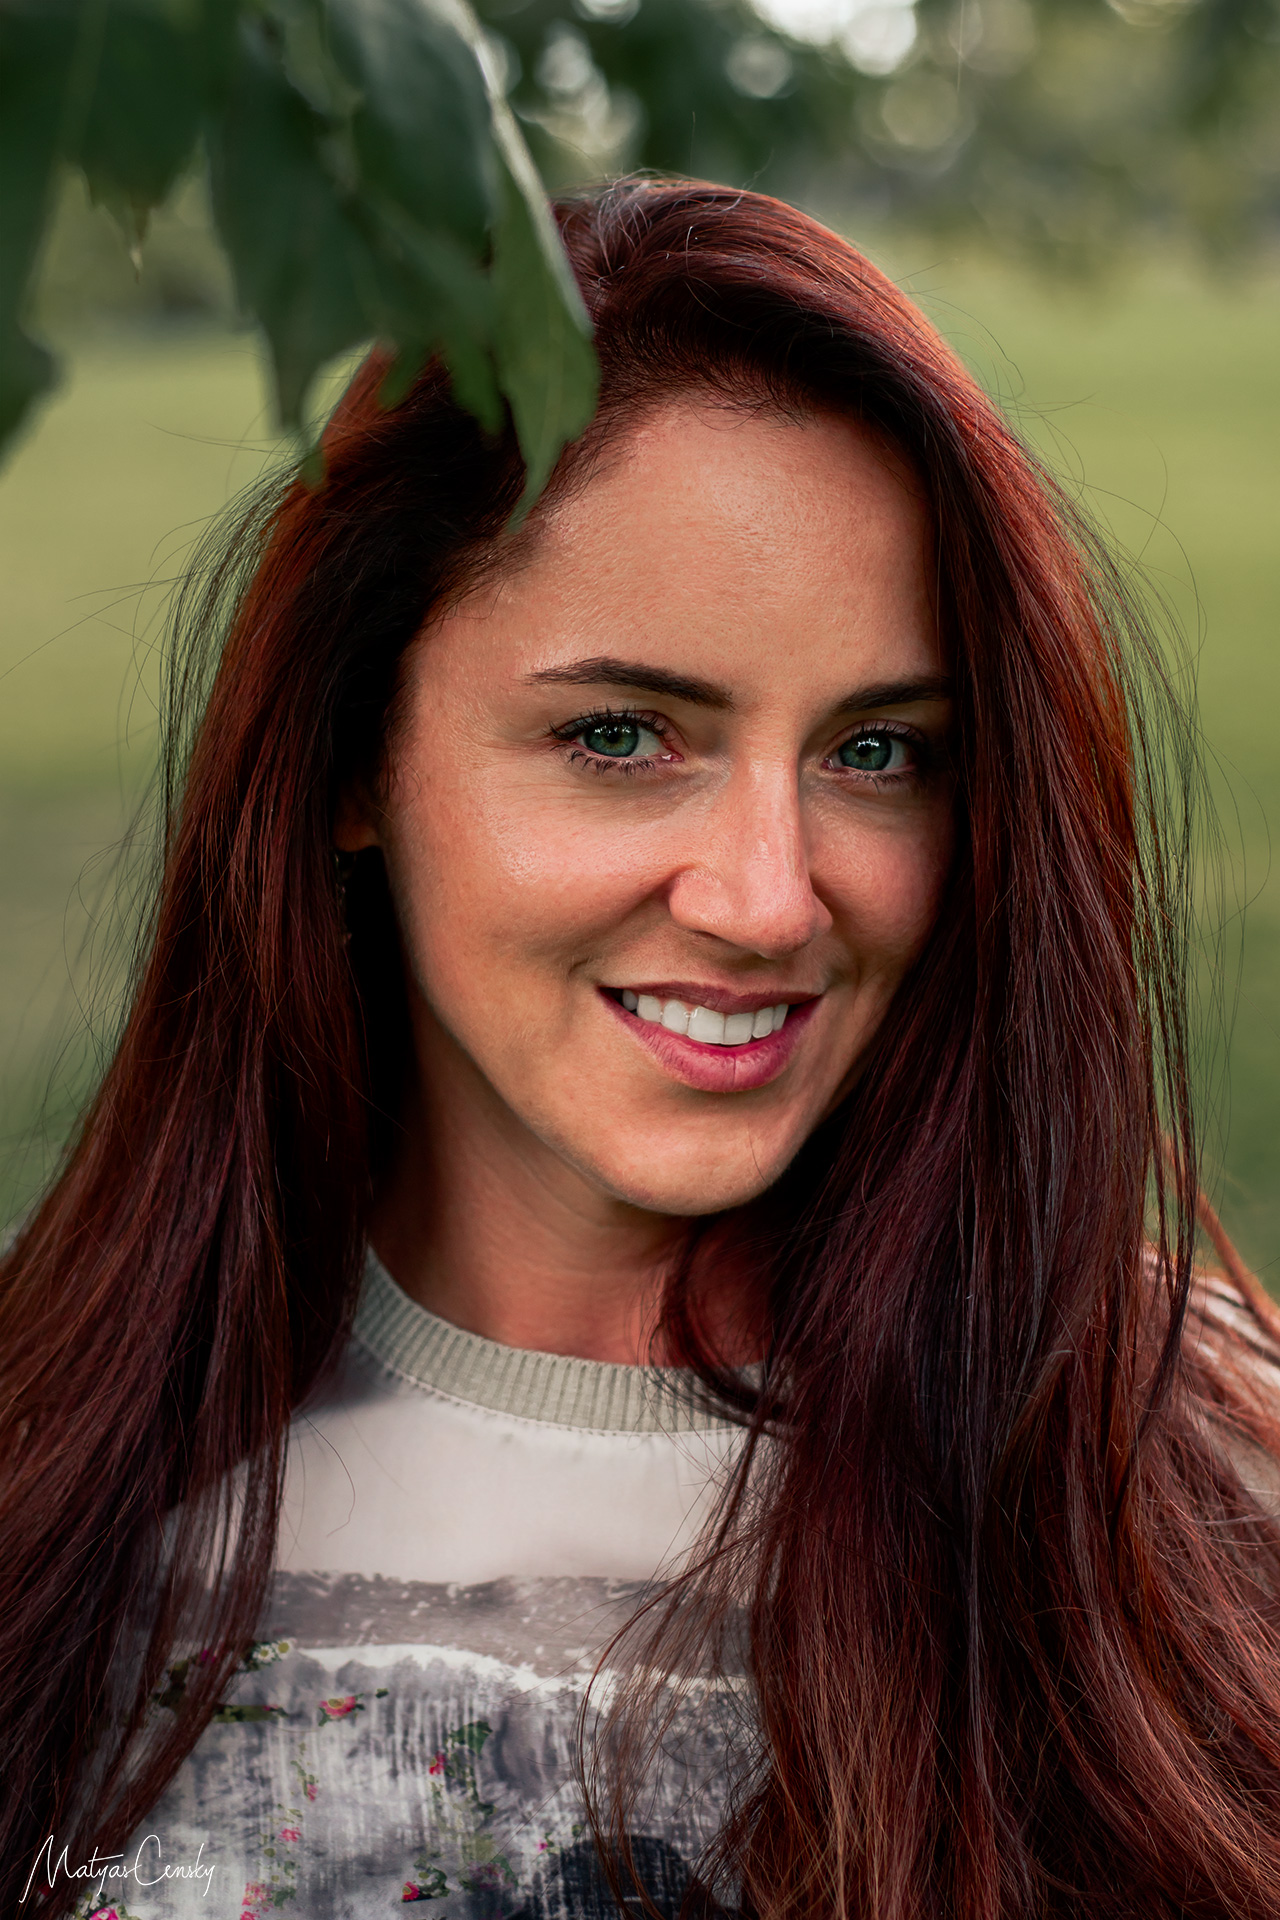 Headshot portrait photograph of a girl with dark red hair and green eyes smiling and standing under a tree in a park Stromovka in Prague.